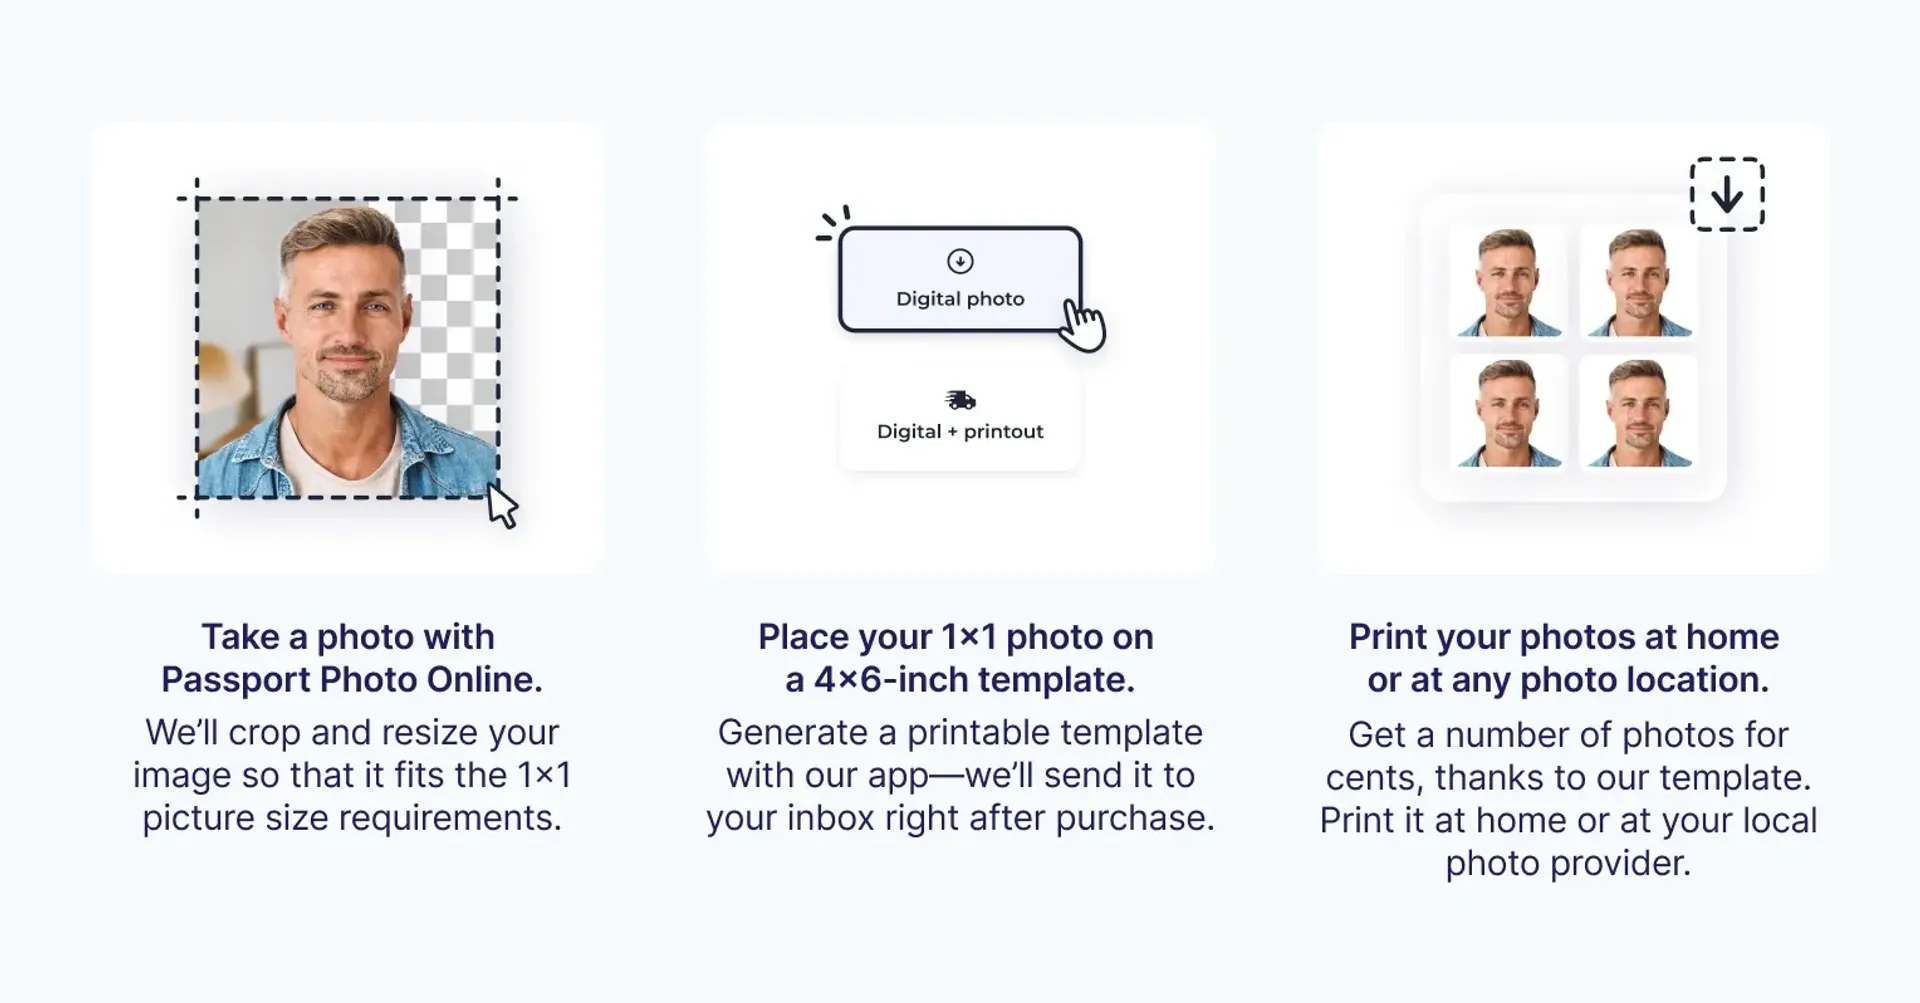 How to print a 1x1 photo with Passport Photo Online